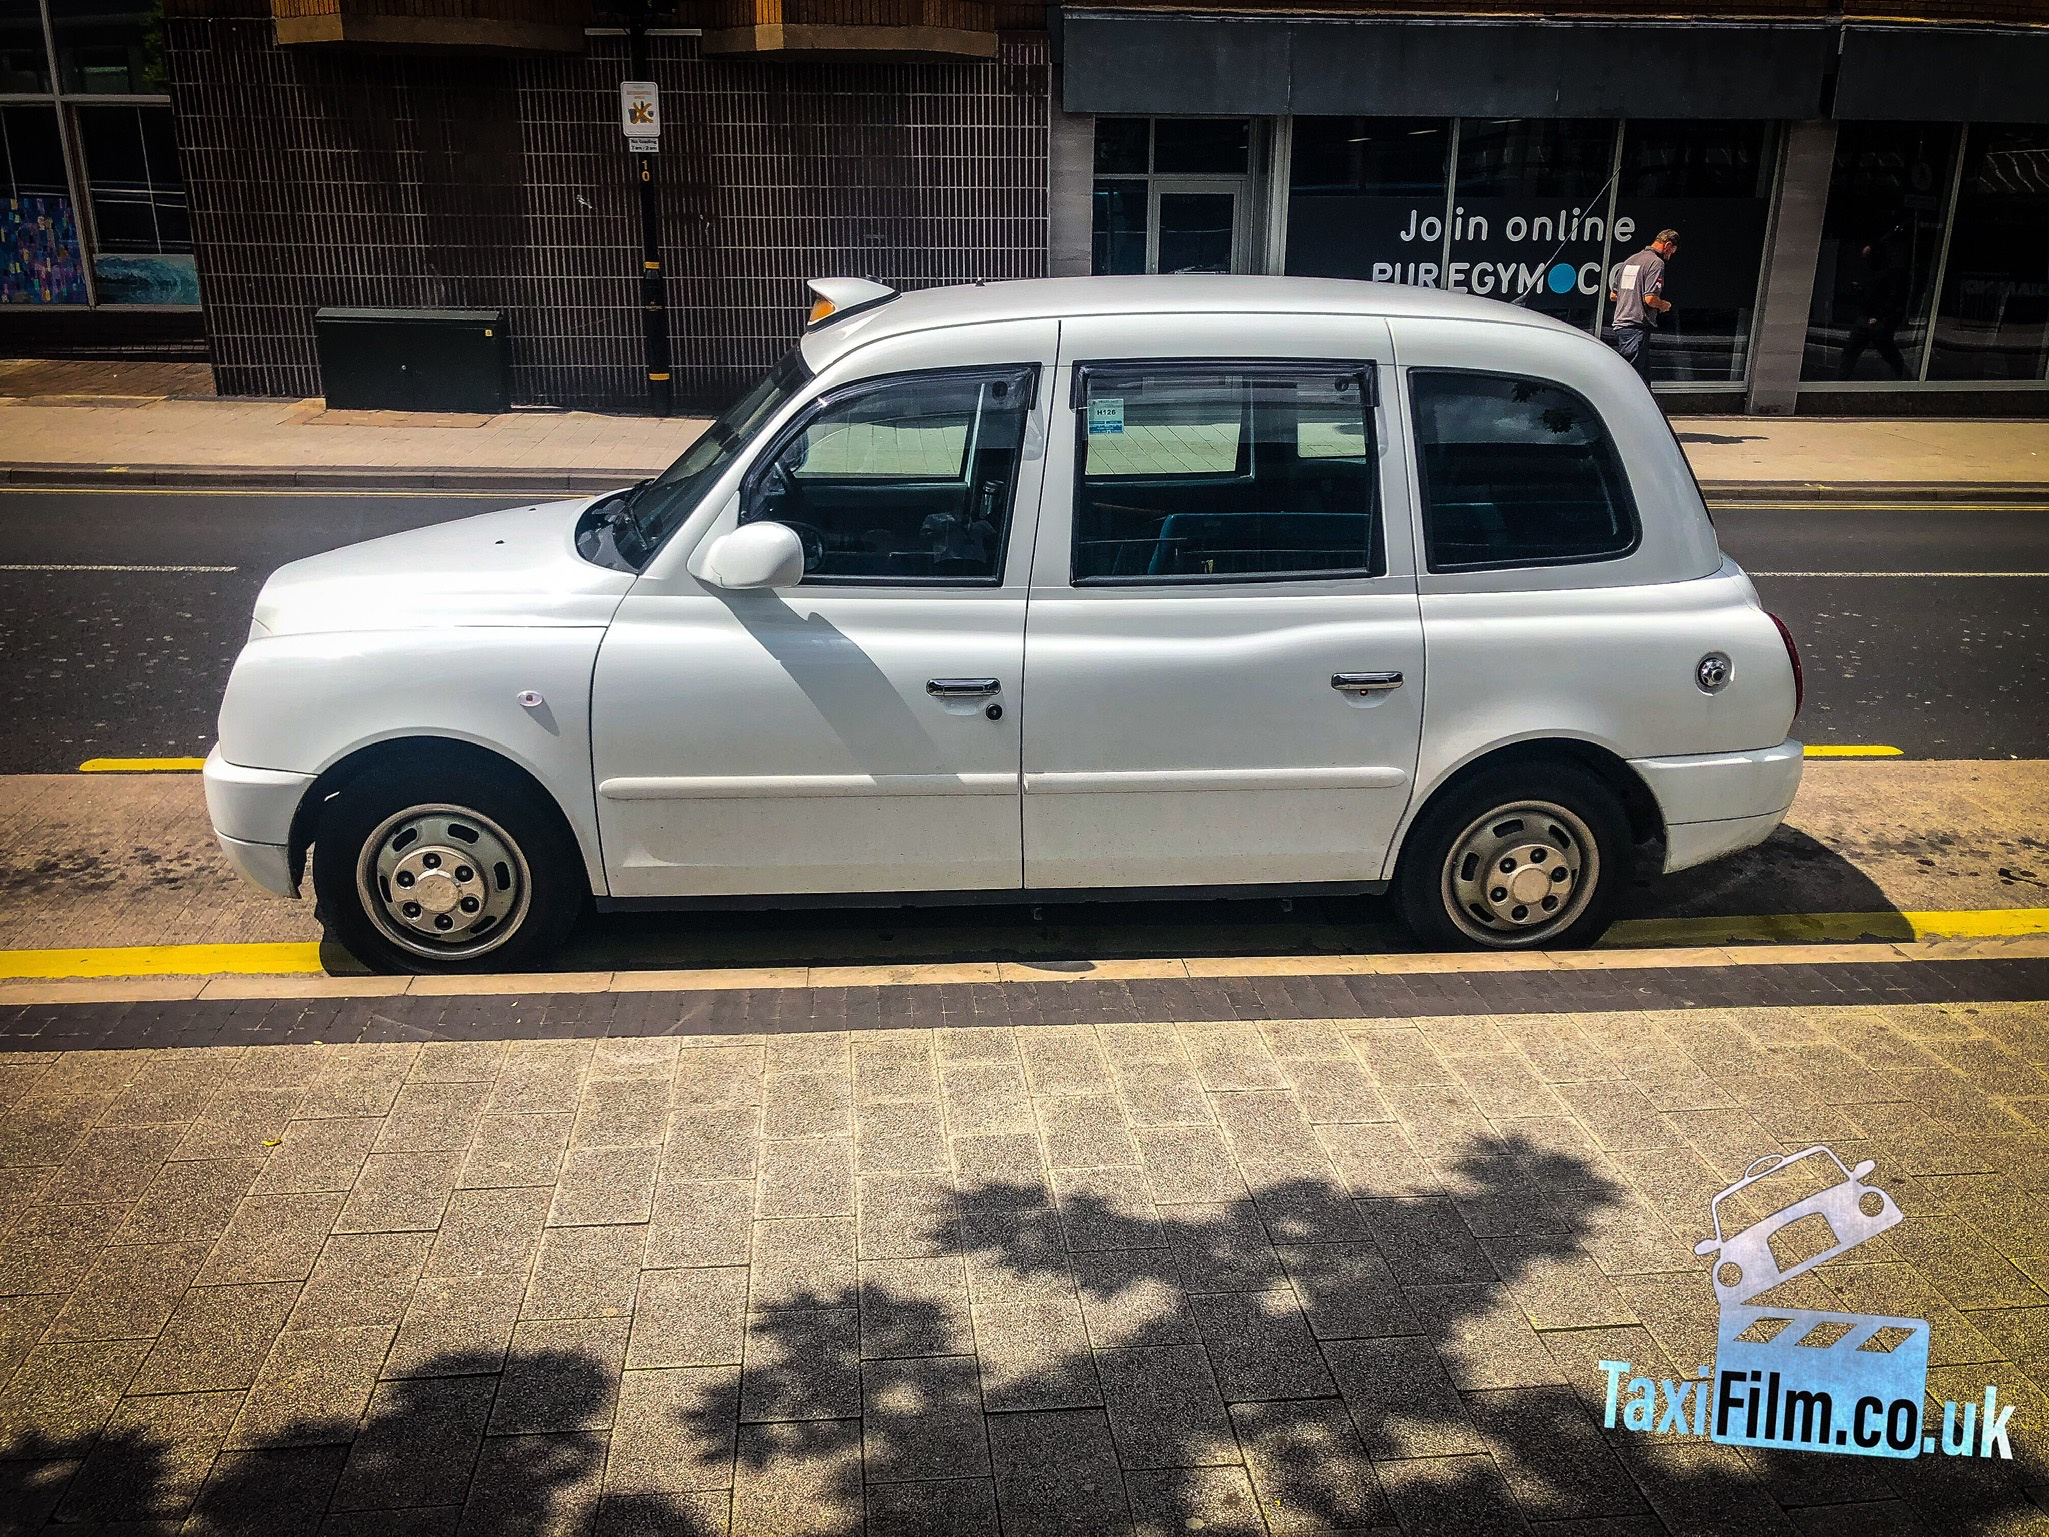 White Tx4 Taxi, ref 0007 action car